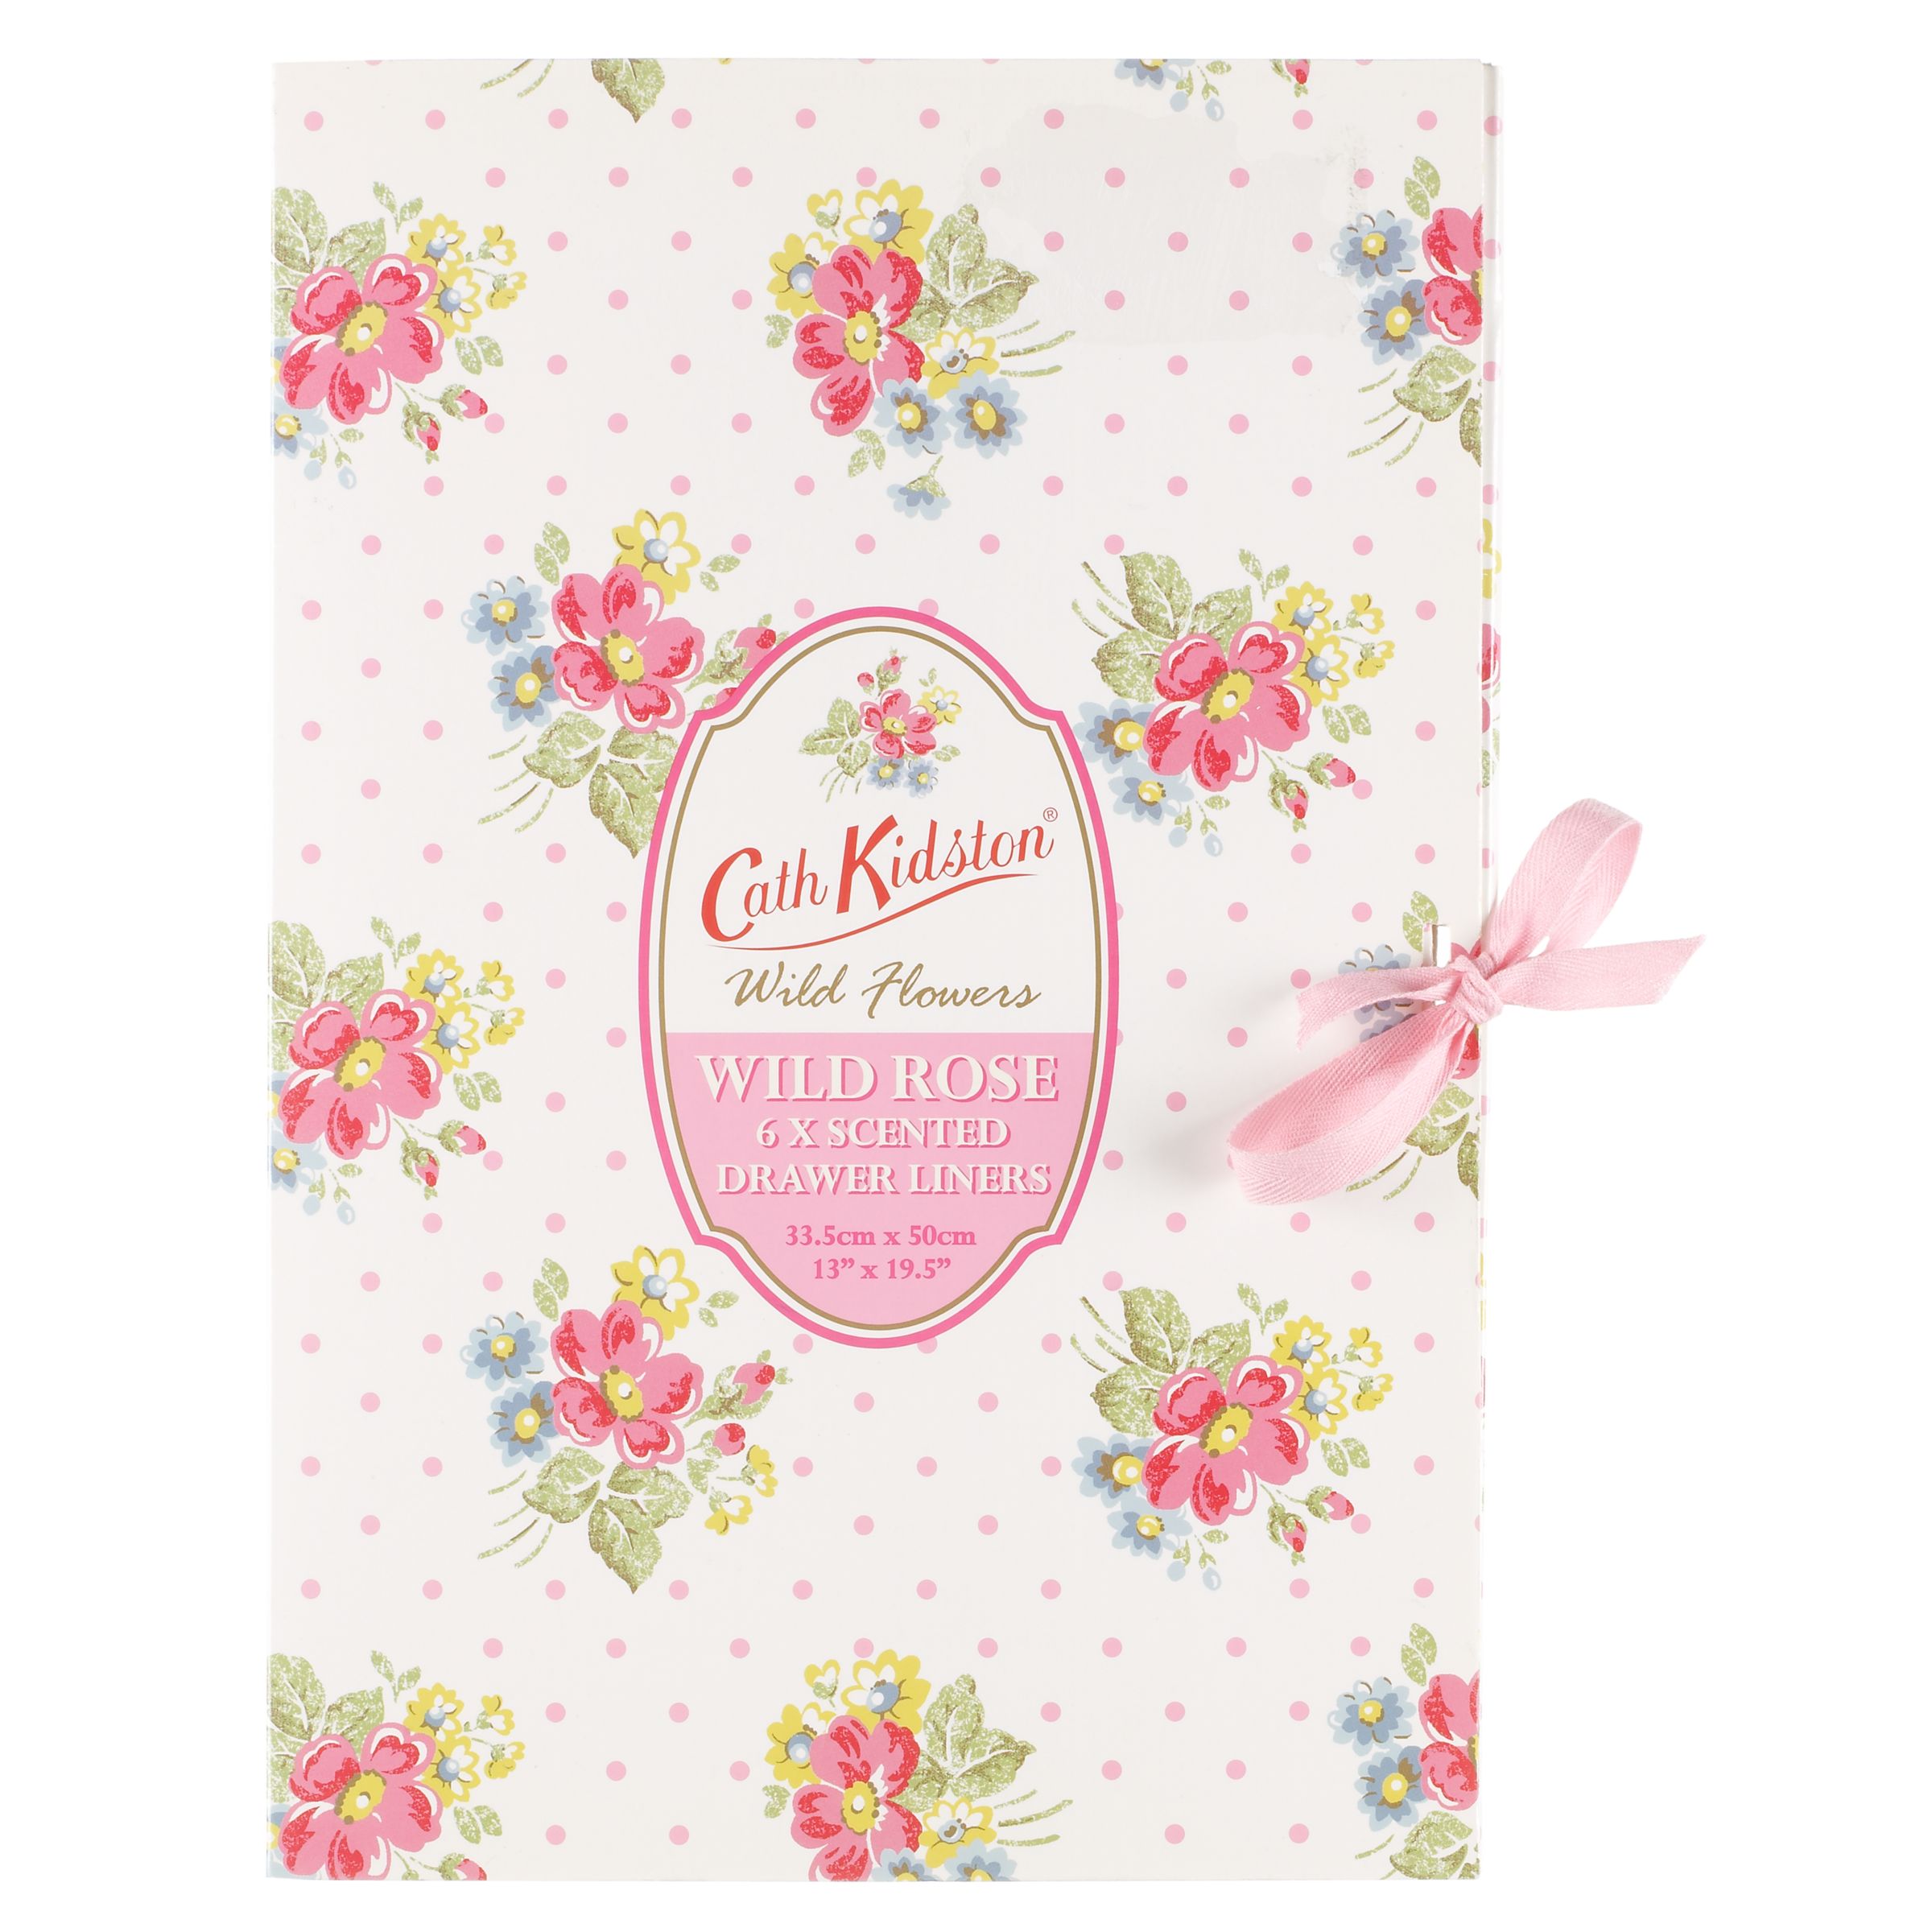 Cath Kidston Wild Rose Drawer Liners, Pack of 6